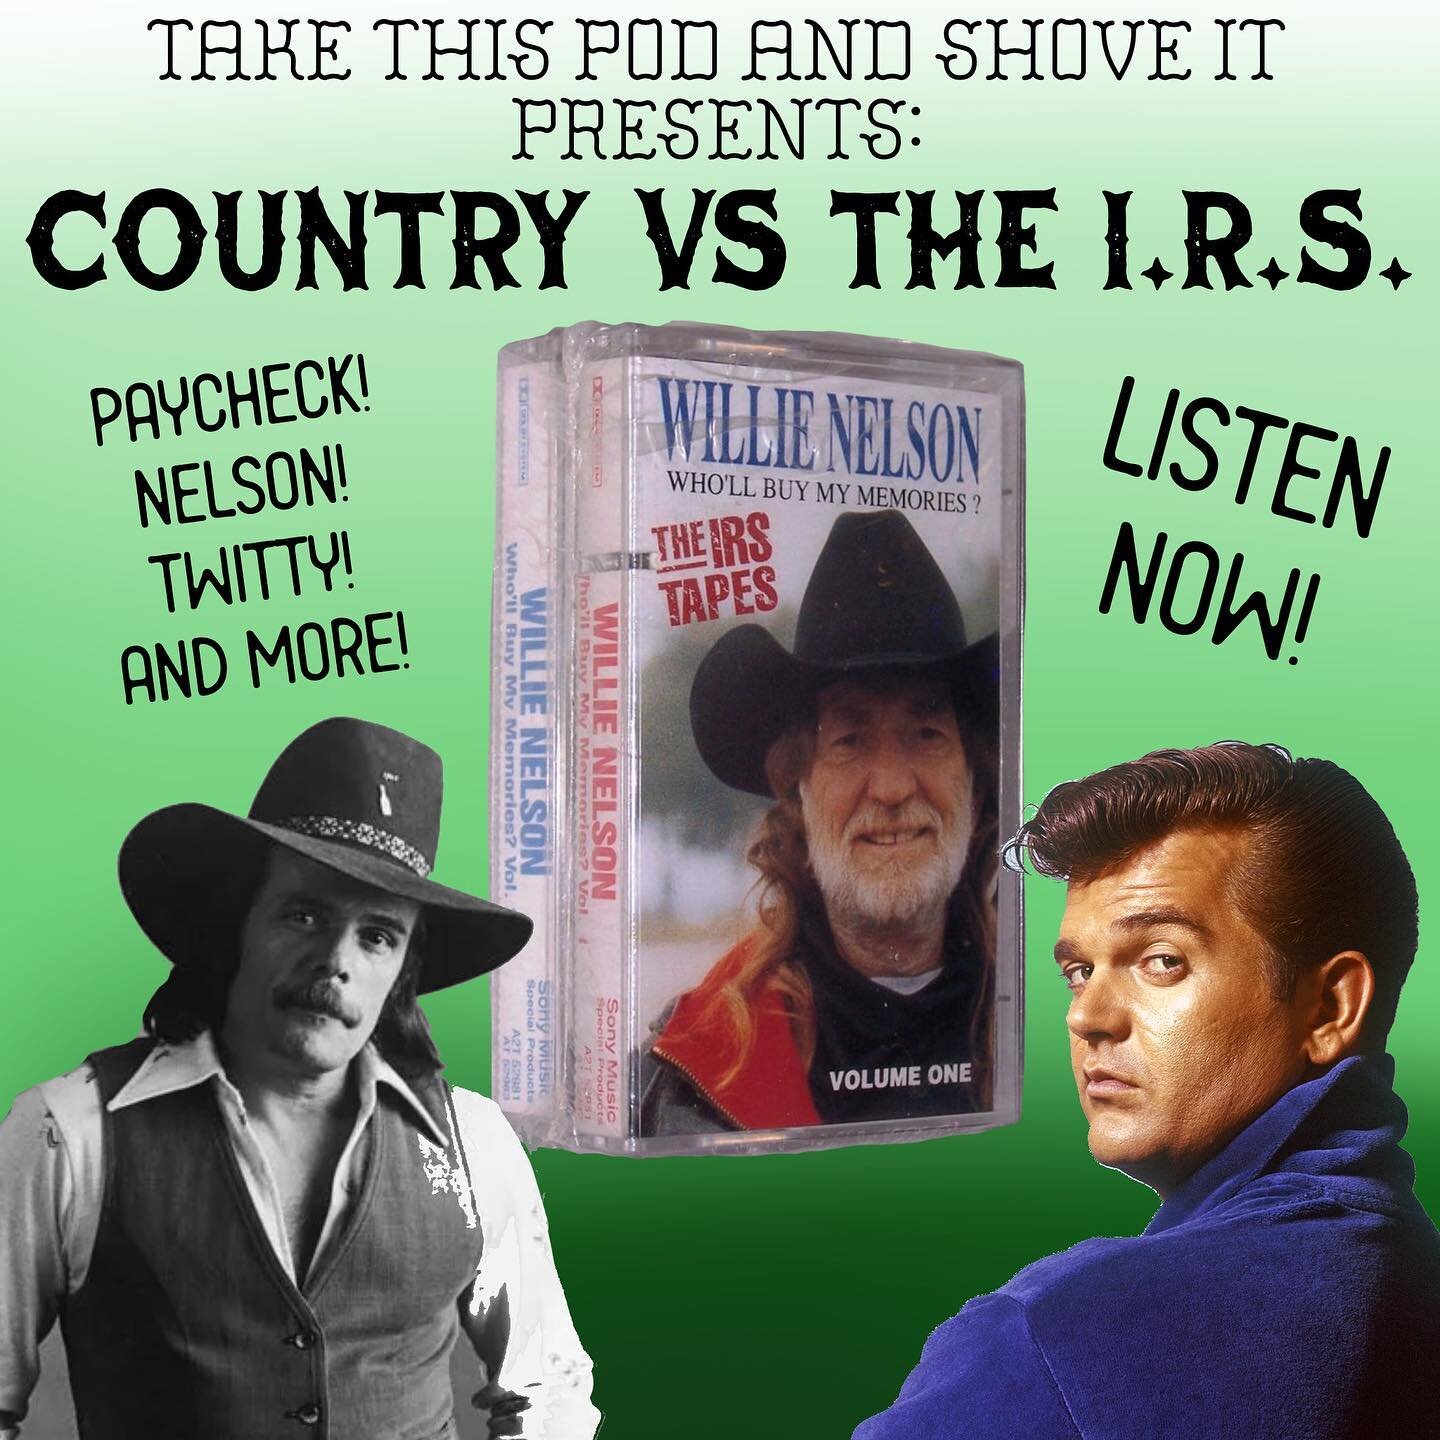 Woof, it&rsquo;s tax day. We hope all our non-billionaire listeners get a nice refund&mdash;but regardless how it shakes out for ya, we think you&rsquo;ll enjoy this special episode about country stars vs the I.R.S. Available wherever you get podcast